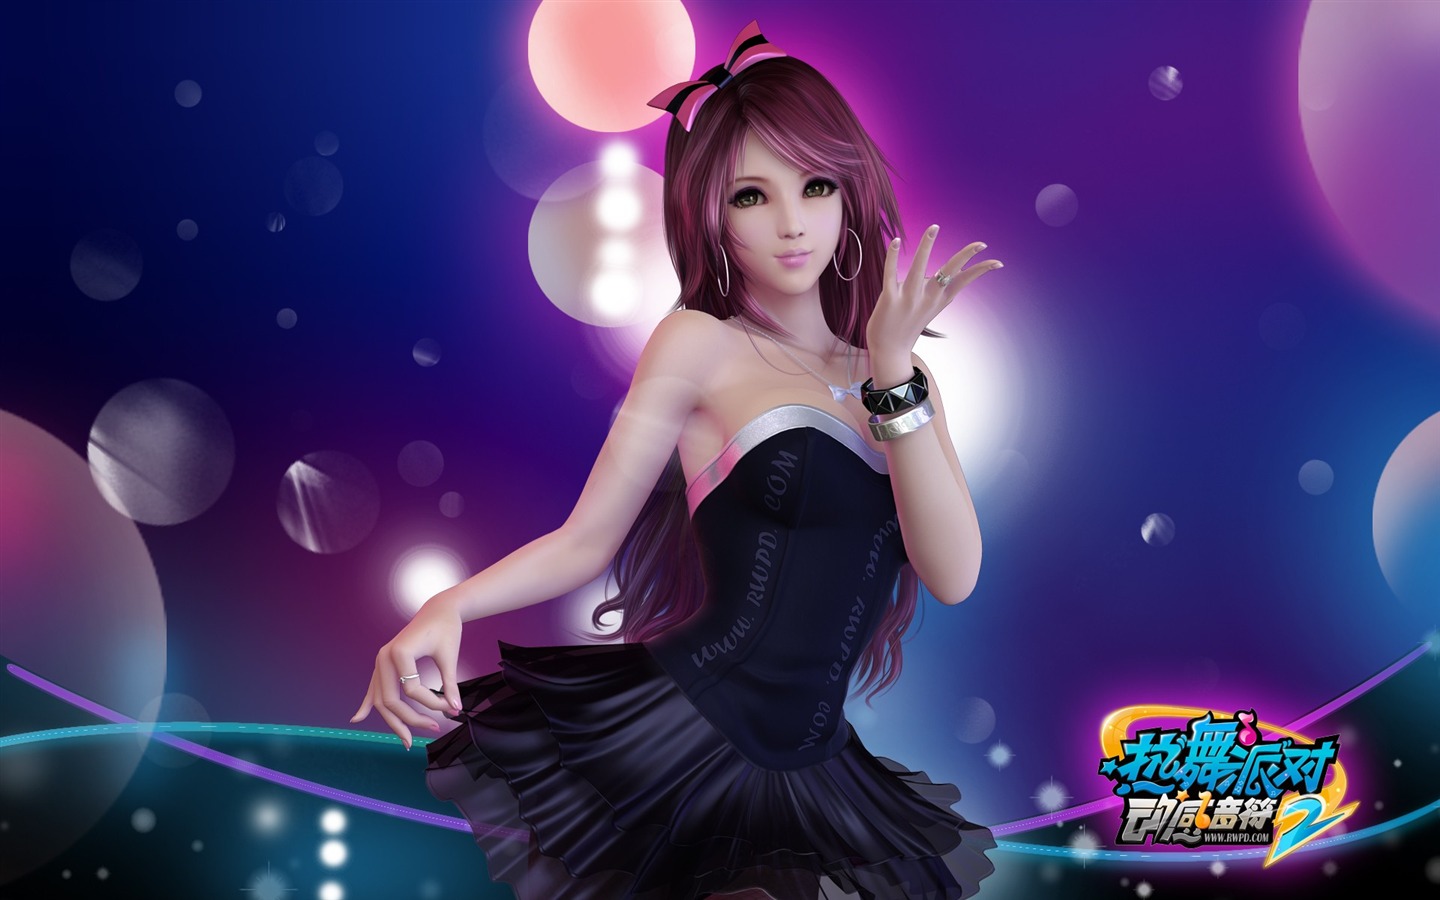 Online game Hot Dance Party II official wallpapers #32 - 1440x900